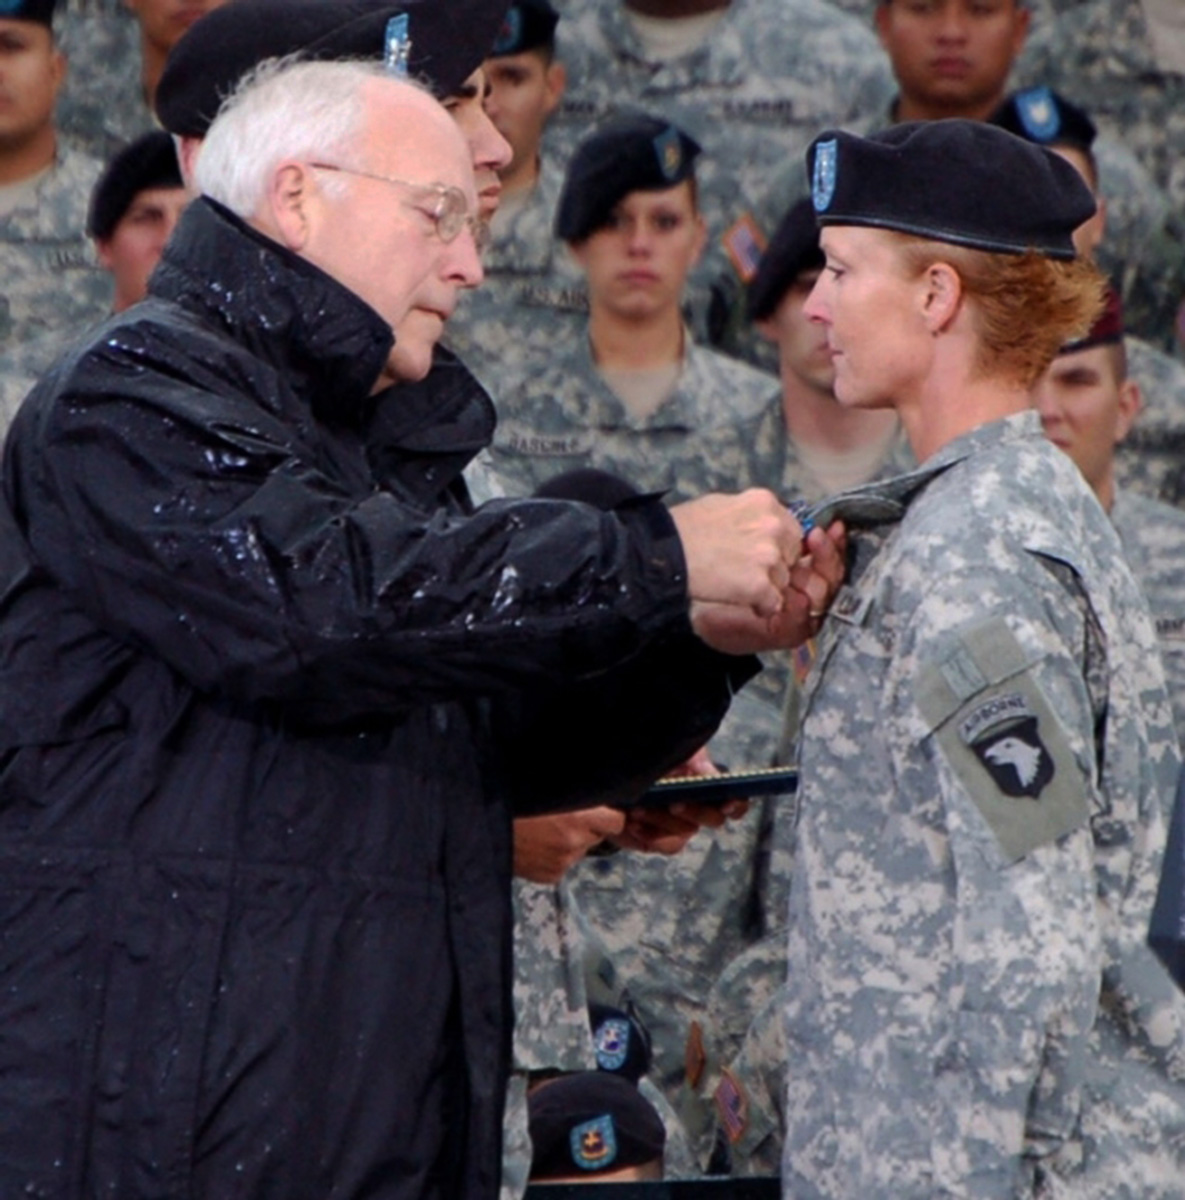 Vice President Dick Cheney presents the Distinguished Flying Cross to Chief Warrant Officer 3 Lori Hill on Oct. 16, 2006. Photo credit: U.S. Army News Service; The appearance of U.S. Department of Defense (DoD) visual information does not imply or constitute DoD endorsement.